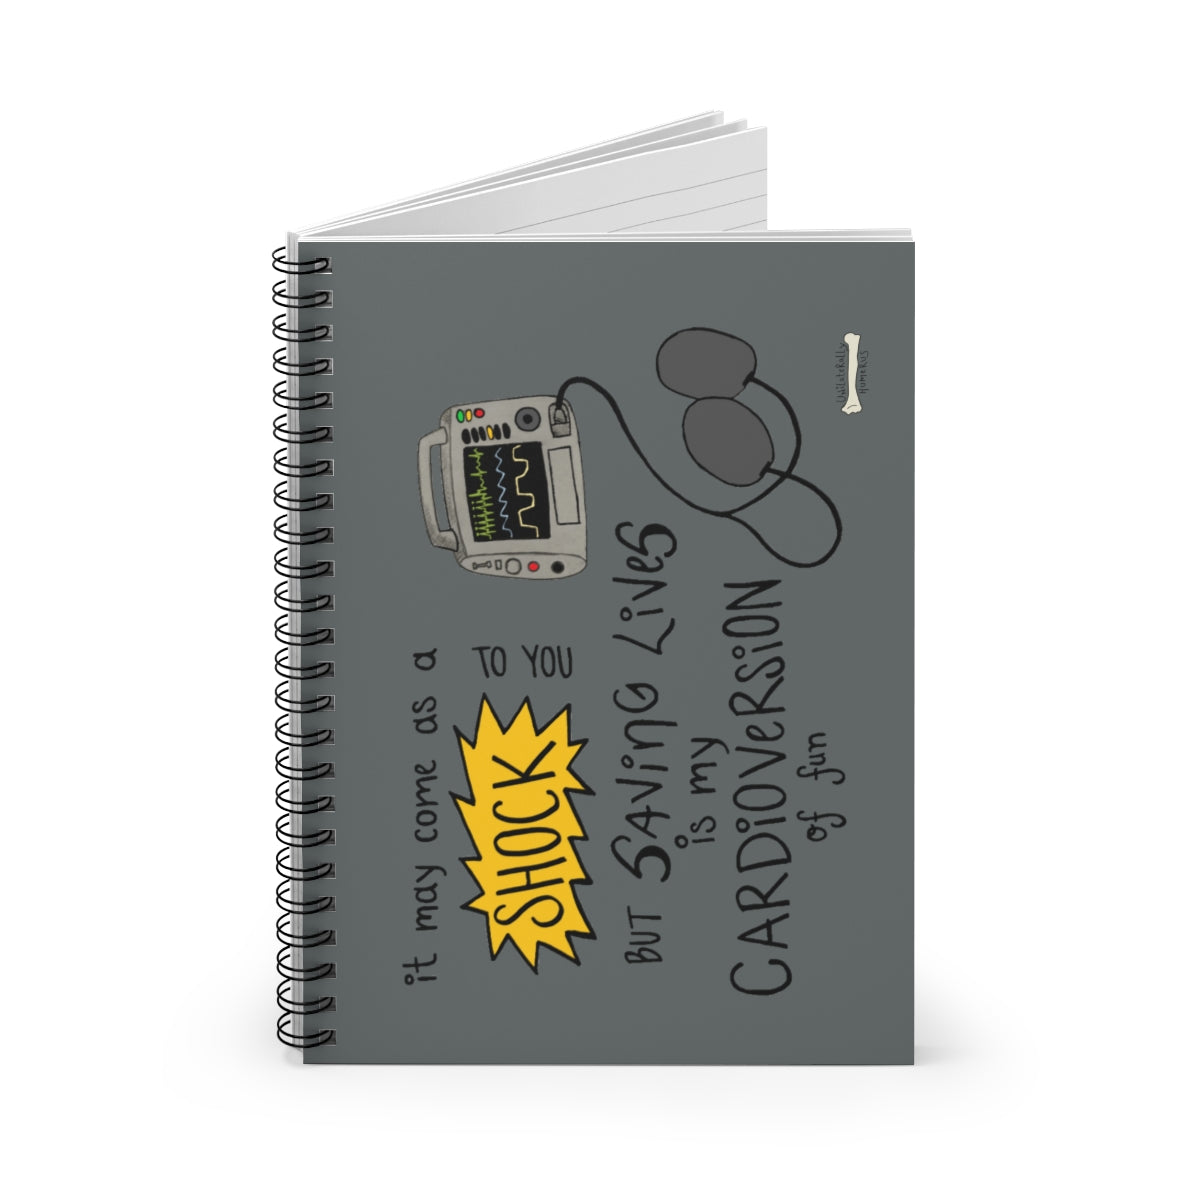 Cardioversion of Fun Spiral Notebook